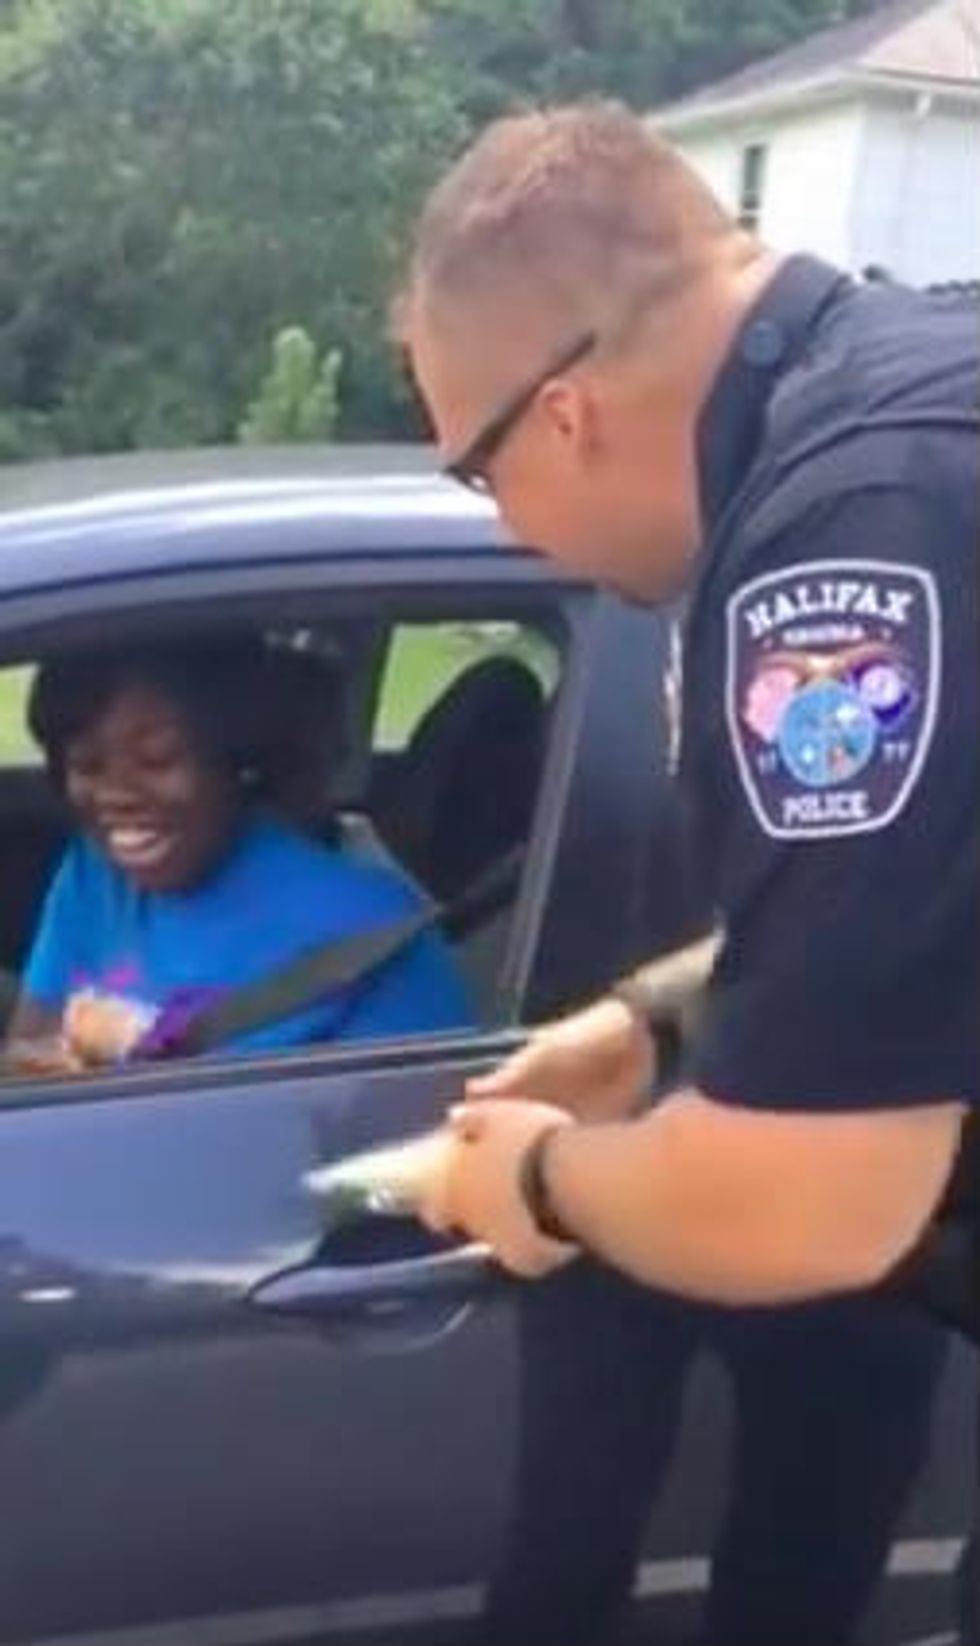 Viral Video: Police Offer Ice Cream to Pulled-Over Drivers in Virginia